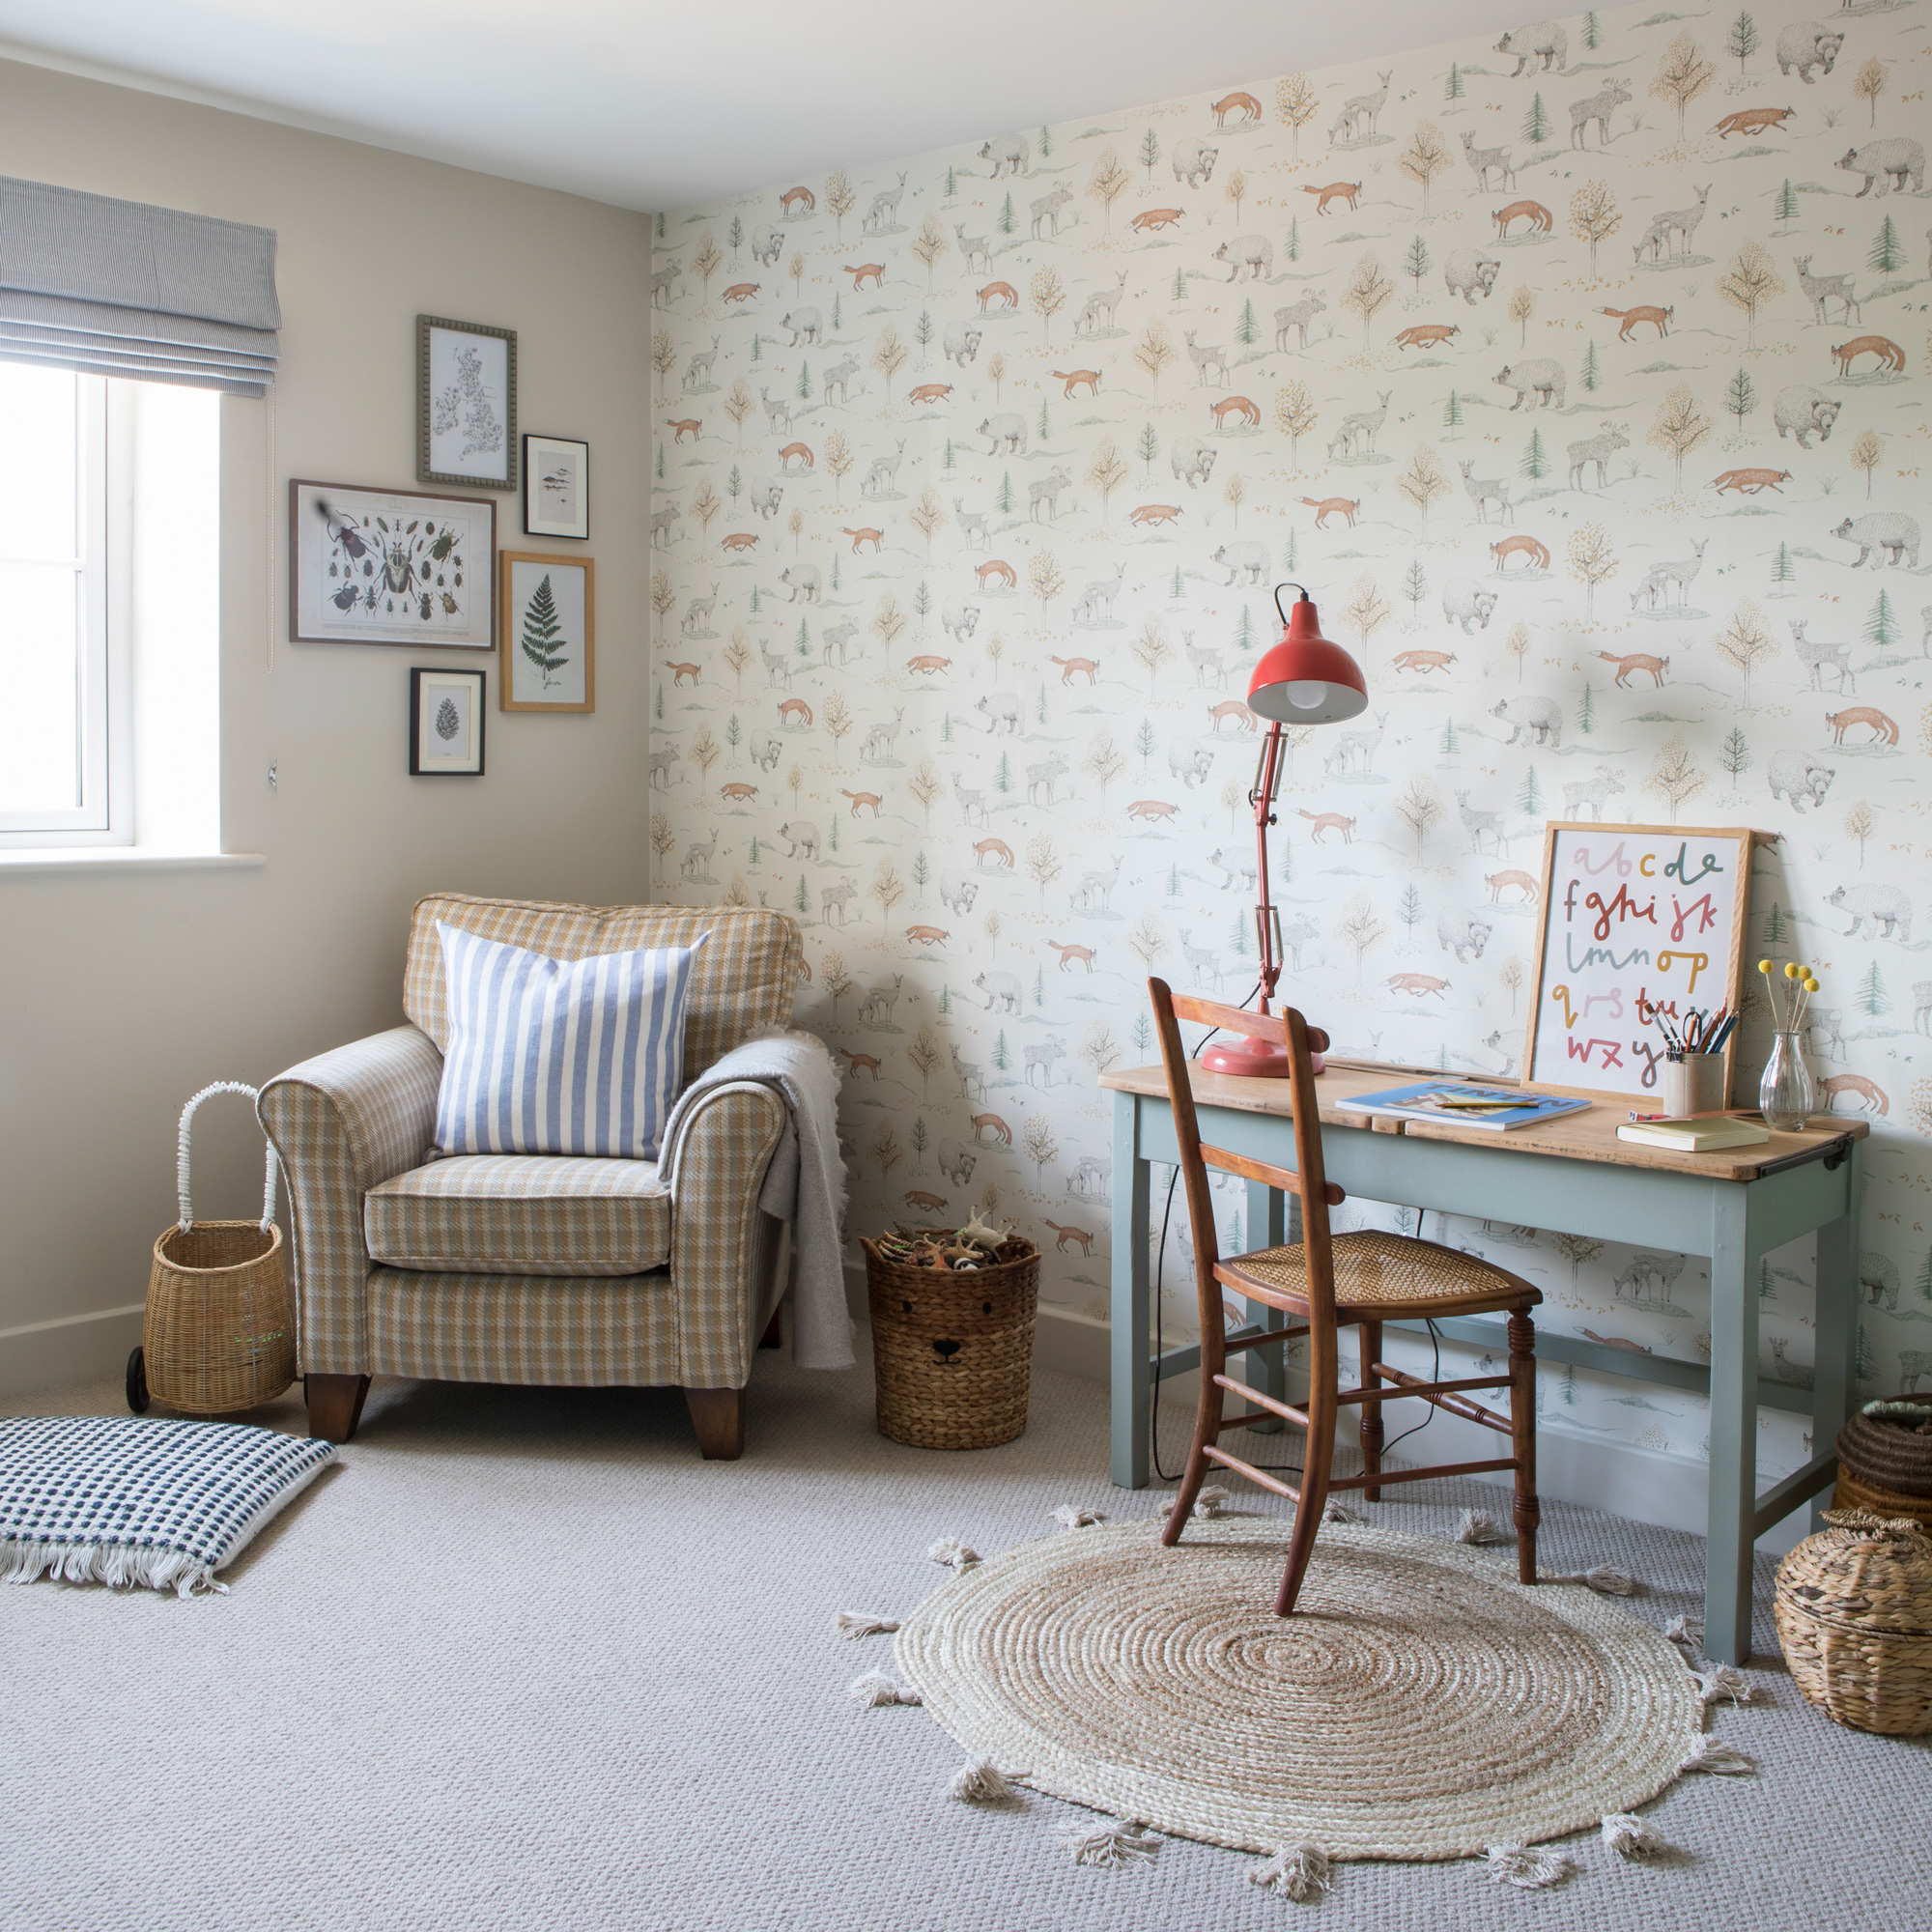 country cottage children's playroom with desk, chair and red lamp, armchair, rug and cute wallpaper